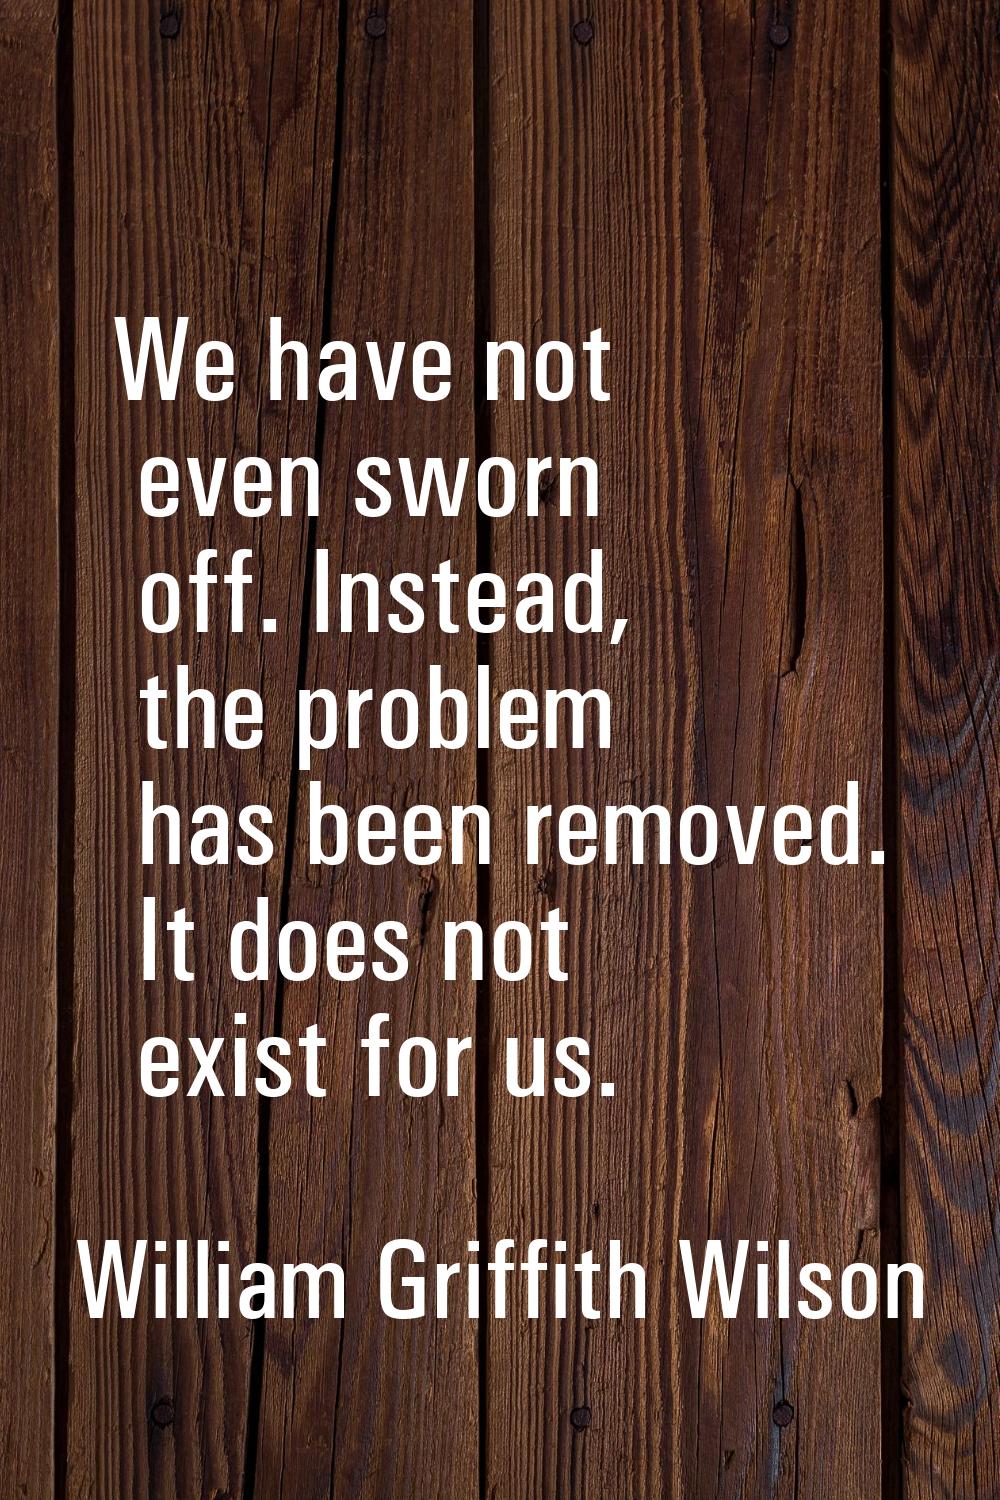 We have not even sworn off. Instead, the problem has been removed. It does not exist for us.